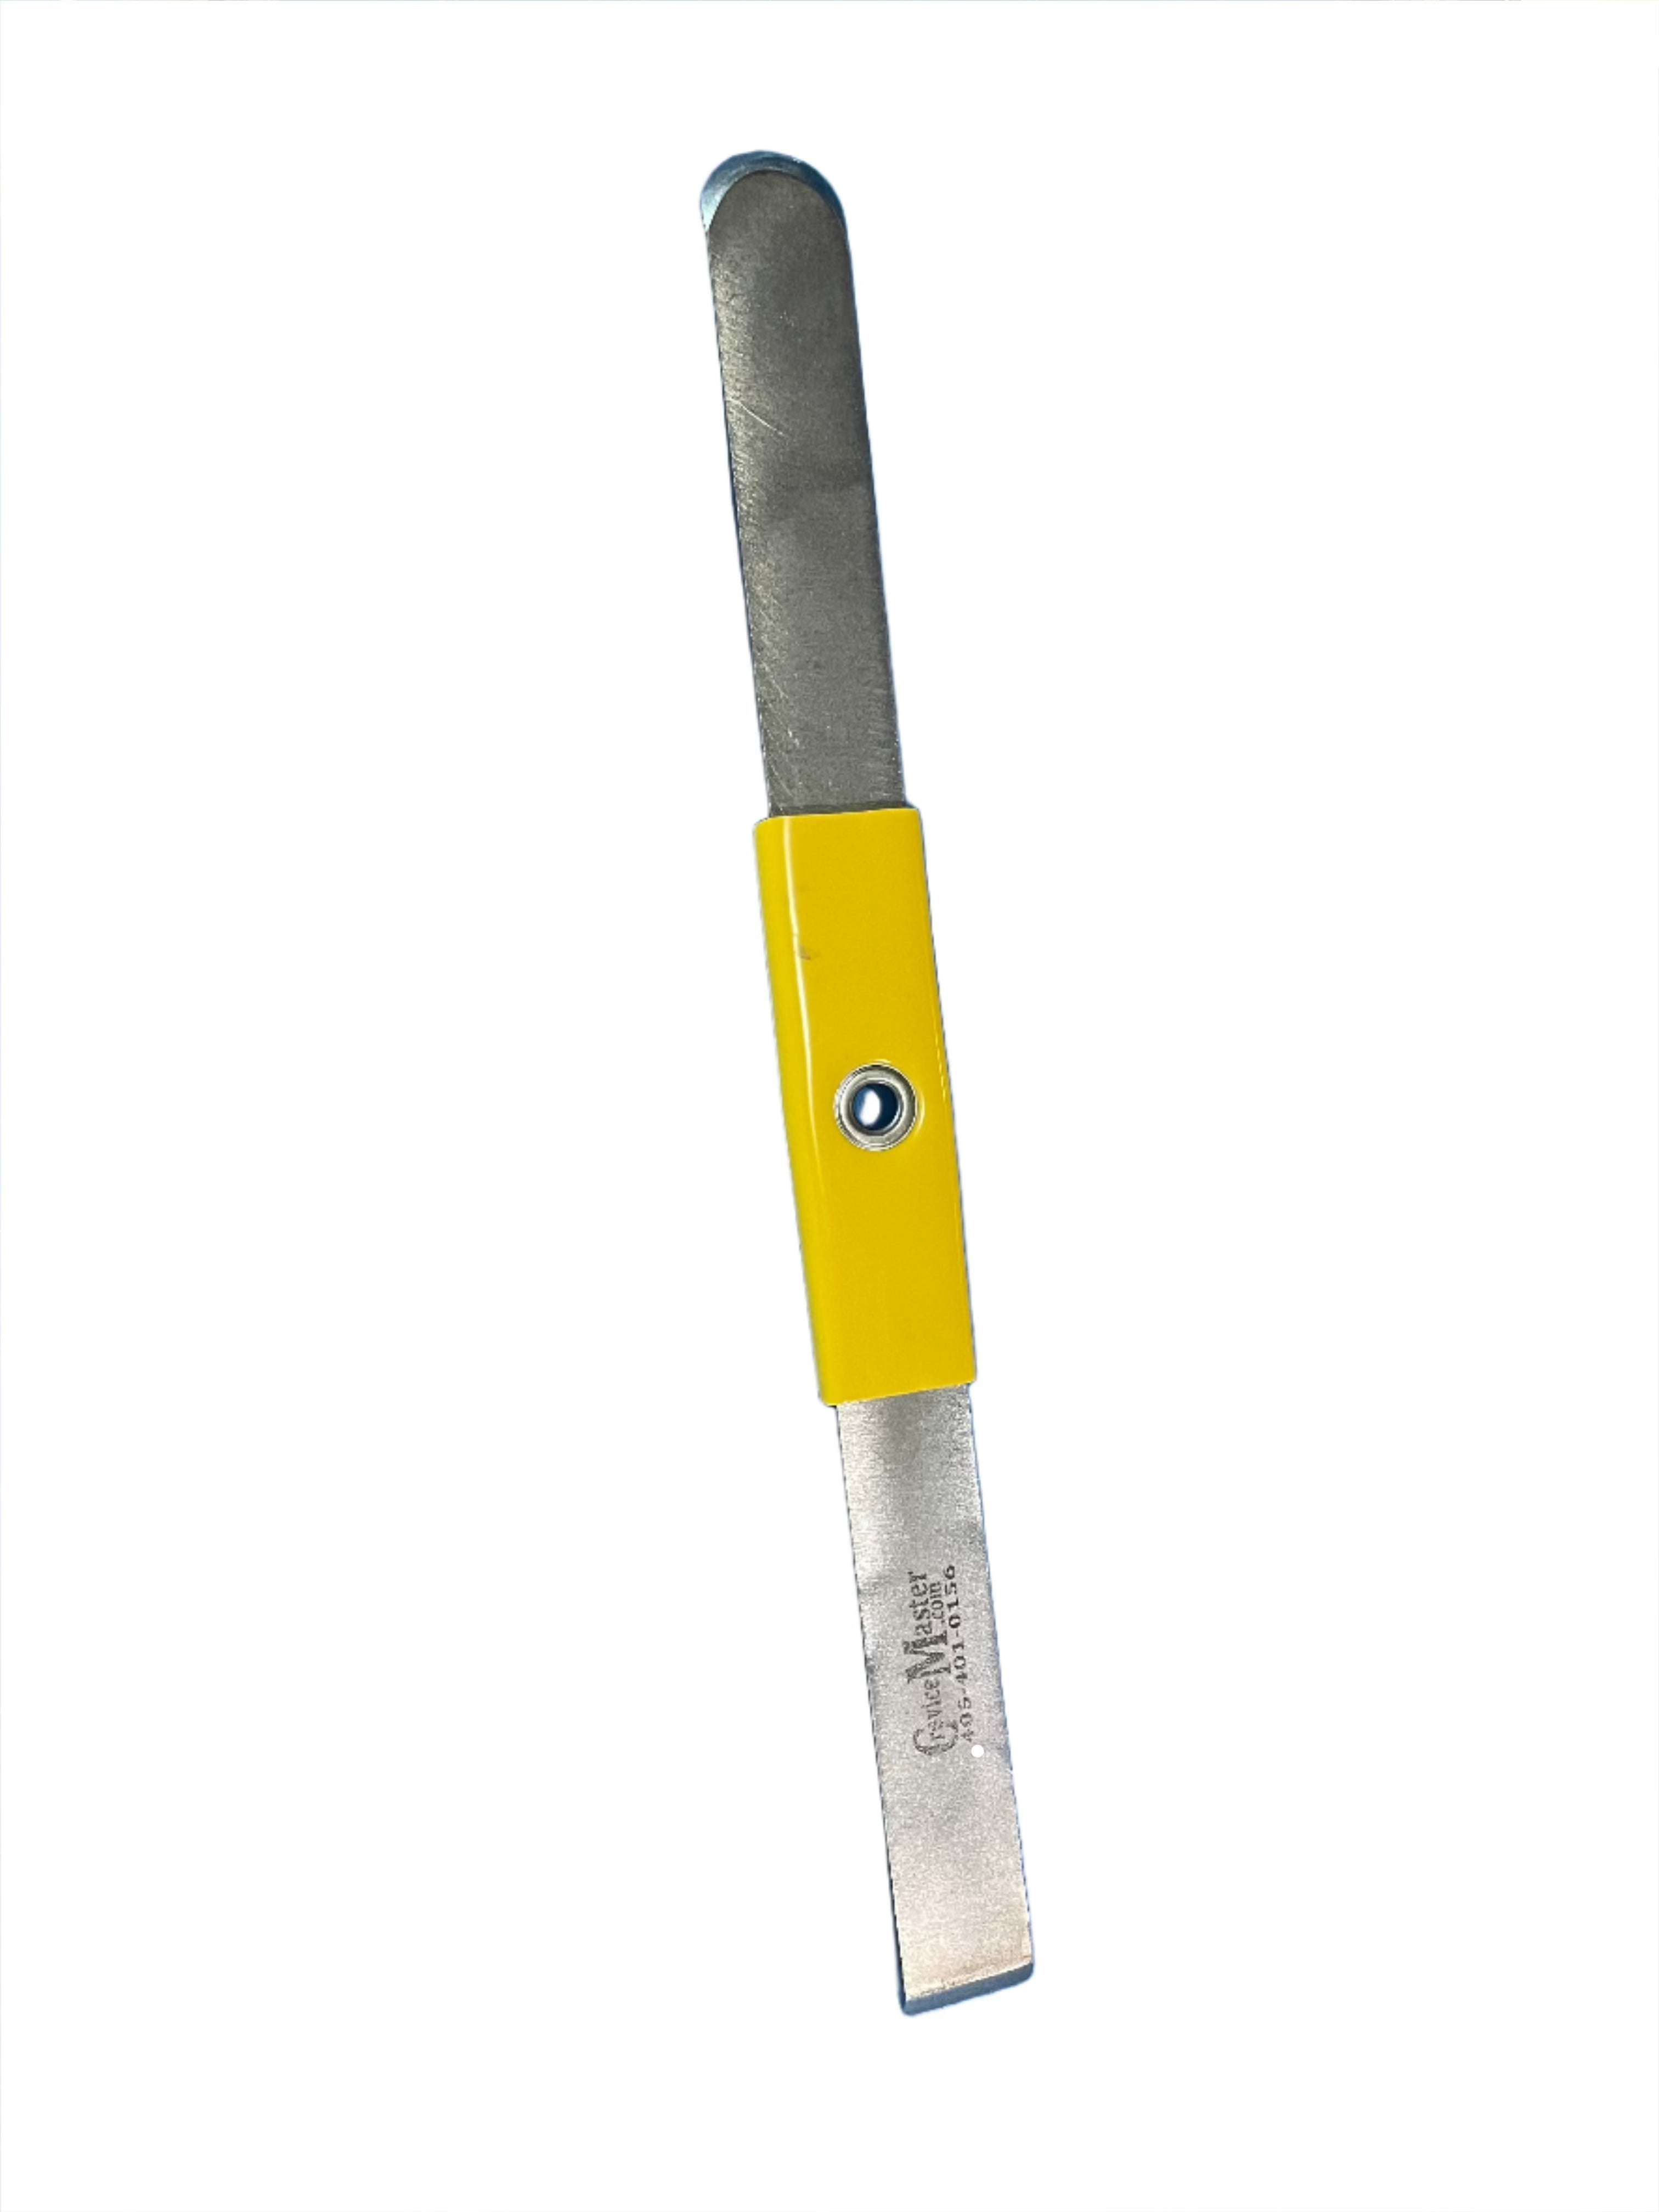 Crevice Chisel for Gold Prospecting with Comfort Handle